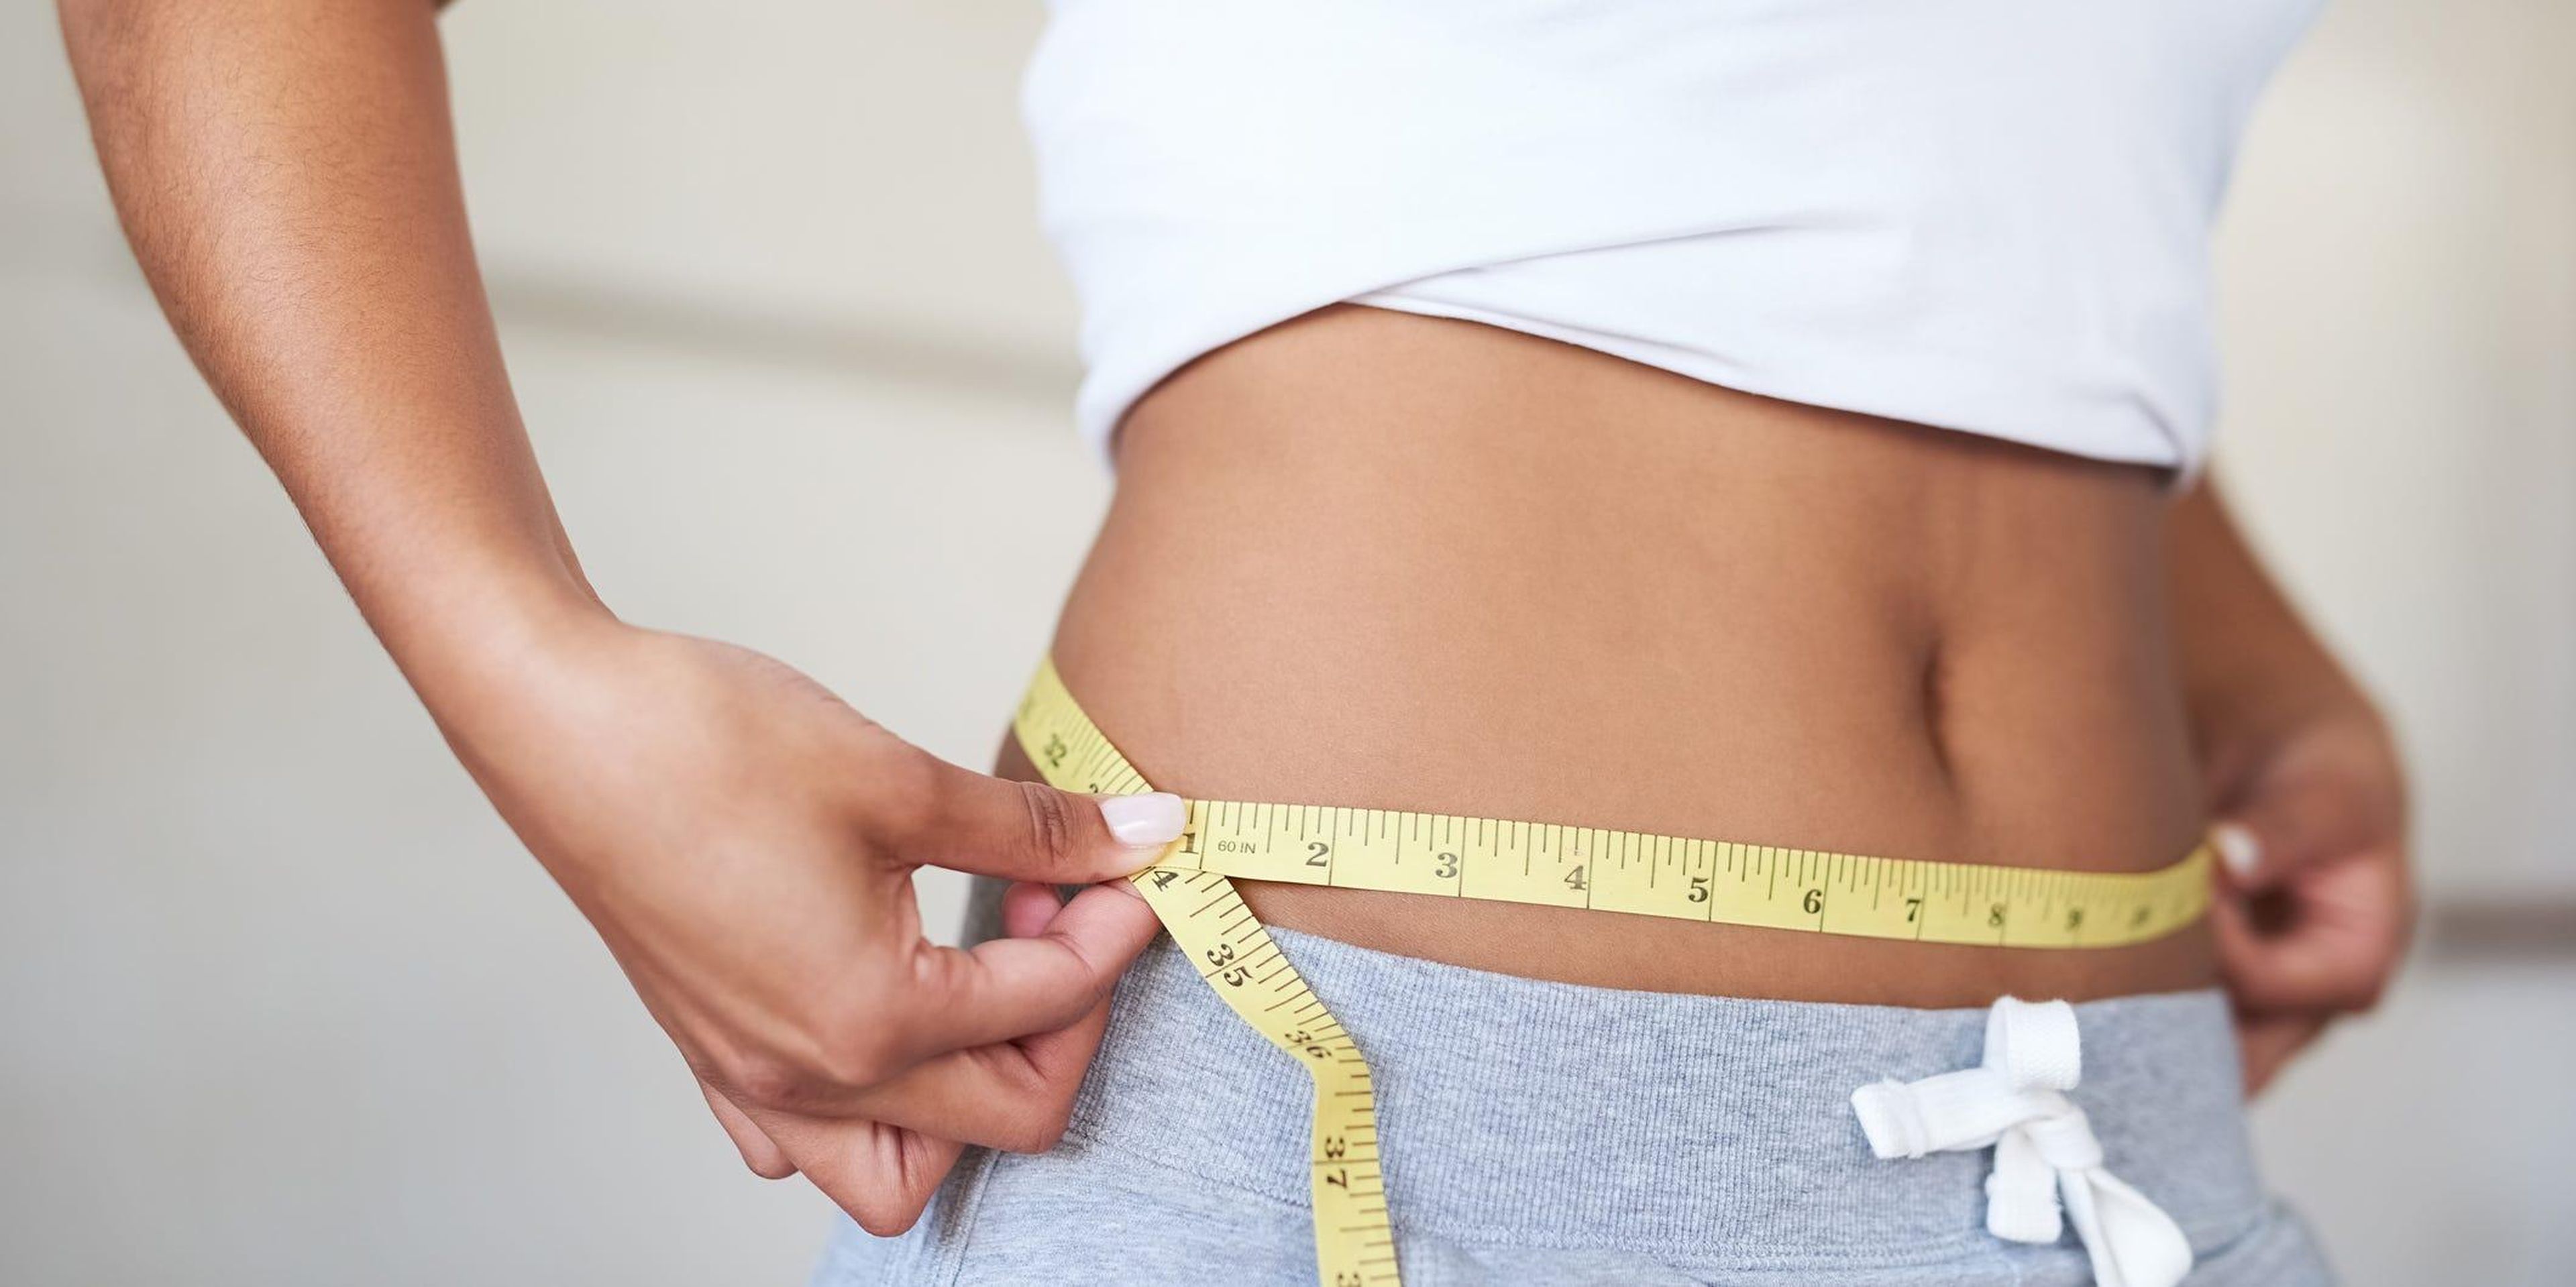 Measuring your waist is a better predictor of health than BMI.